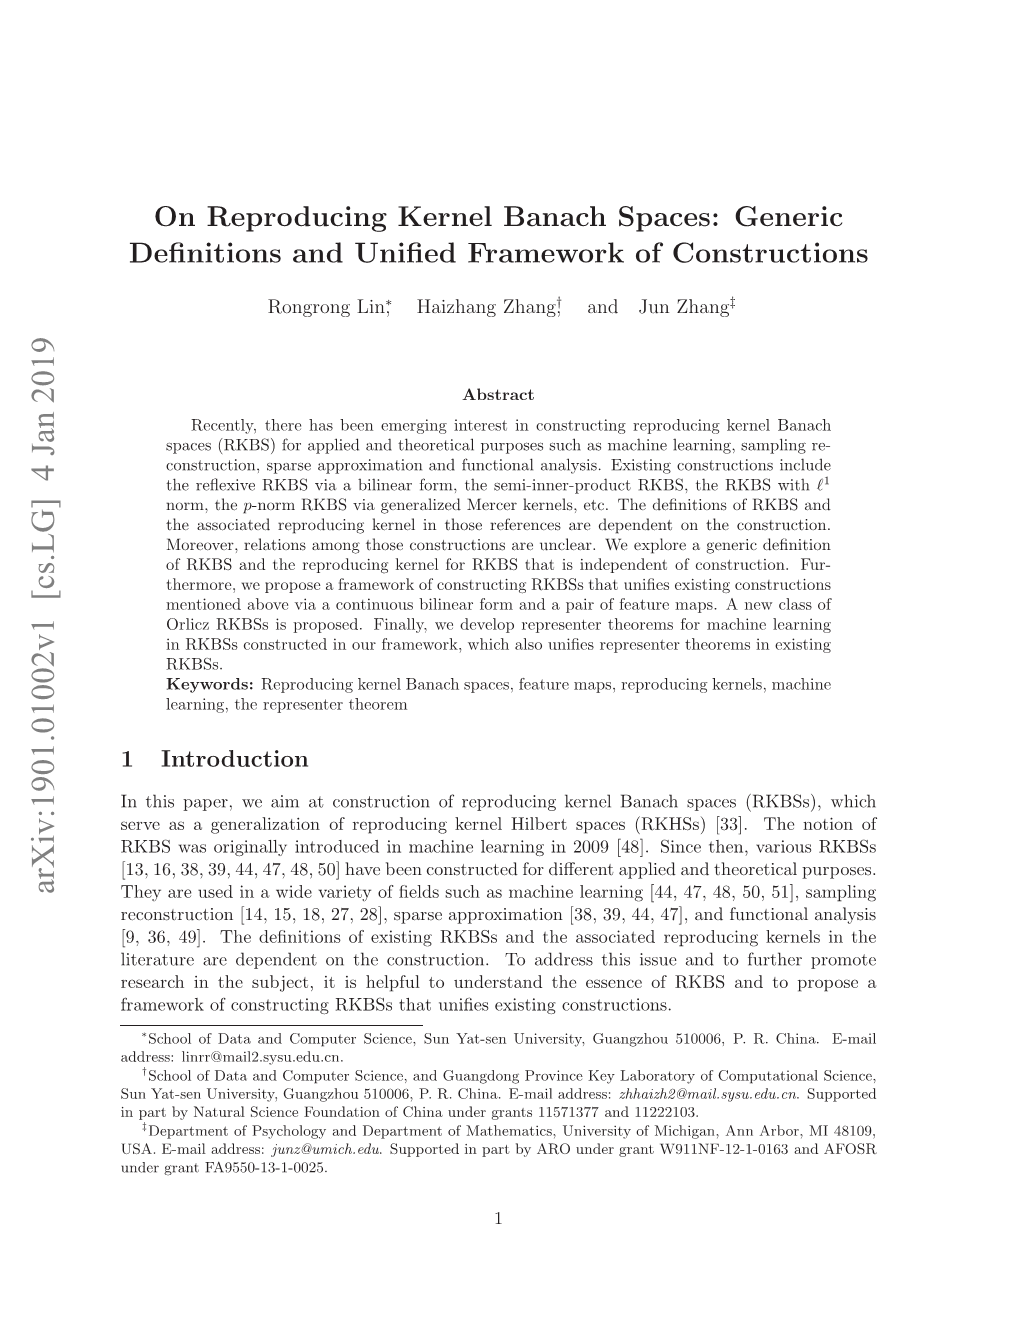 On Reproducing Kernel Banach Spaces: Generic Definitions and Unified Framework of Constructions